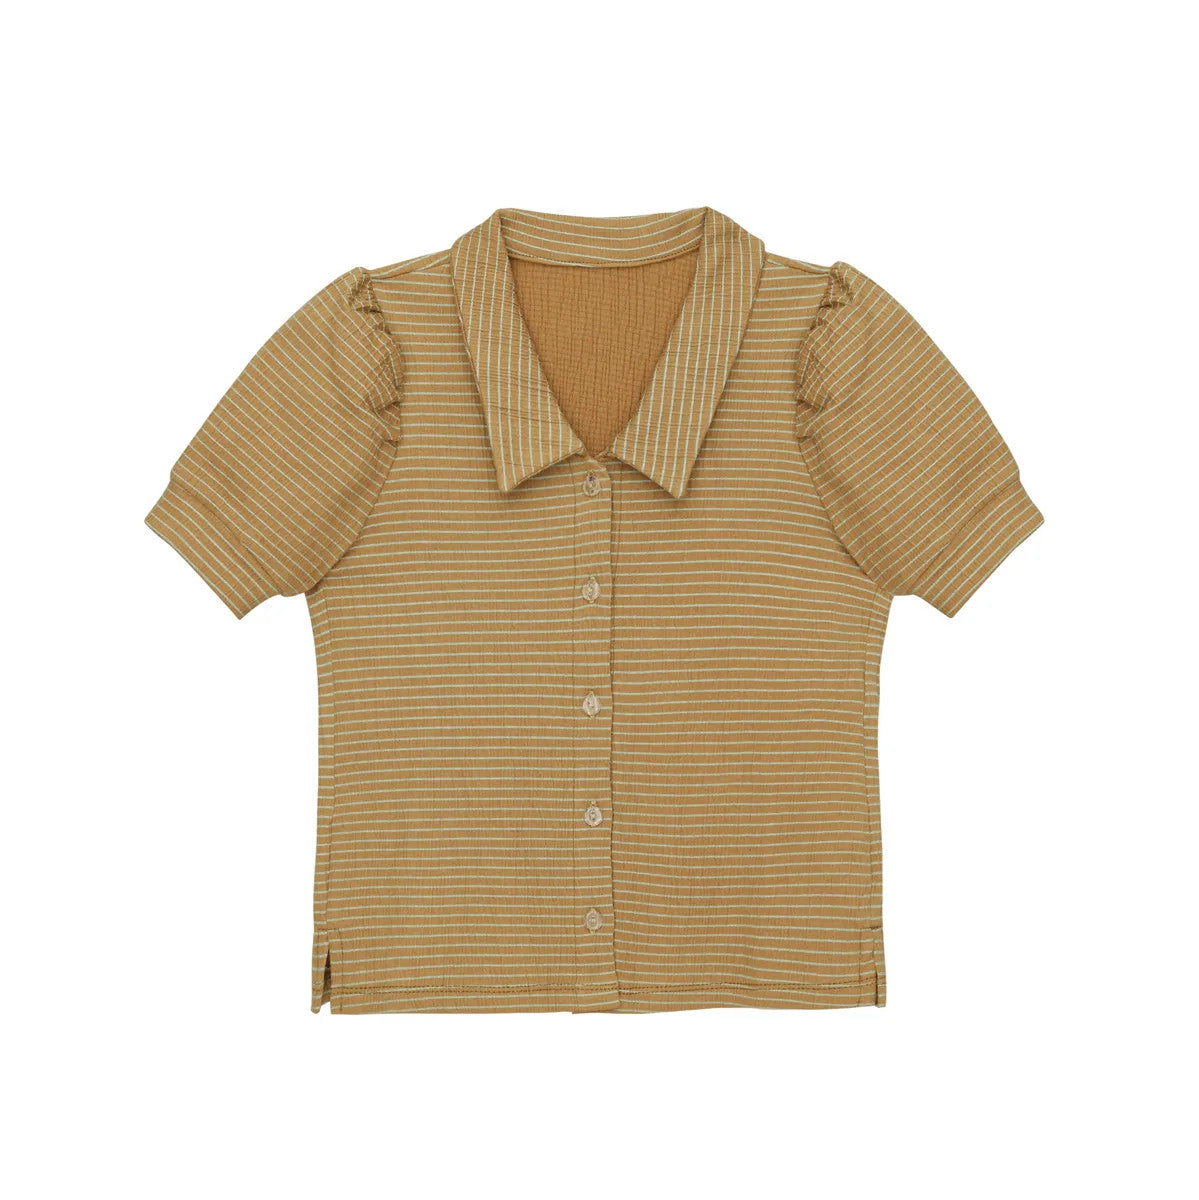 Little Hedonist puff sleeve blouse in Amber Gold for girls. This button down shirt is made from organic cotton. Sustainable kids clothing.